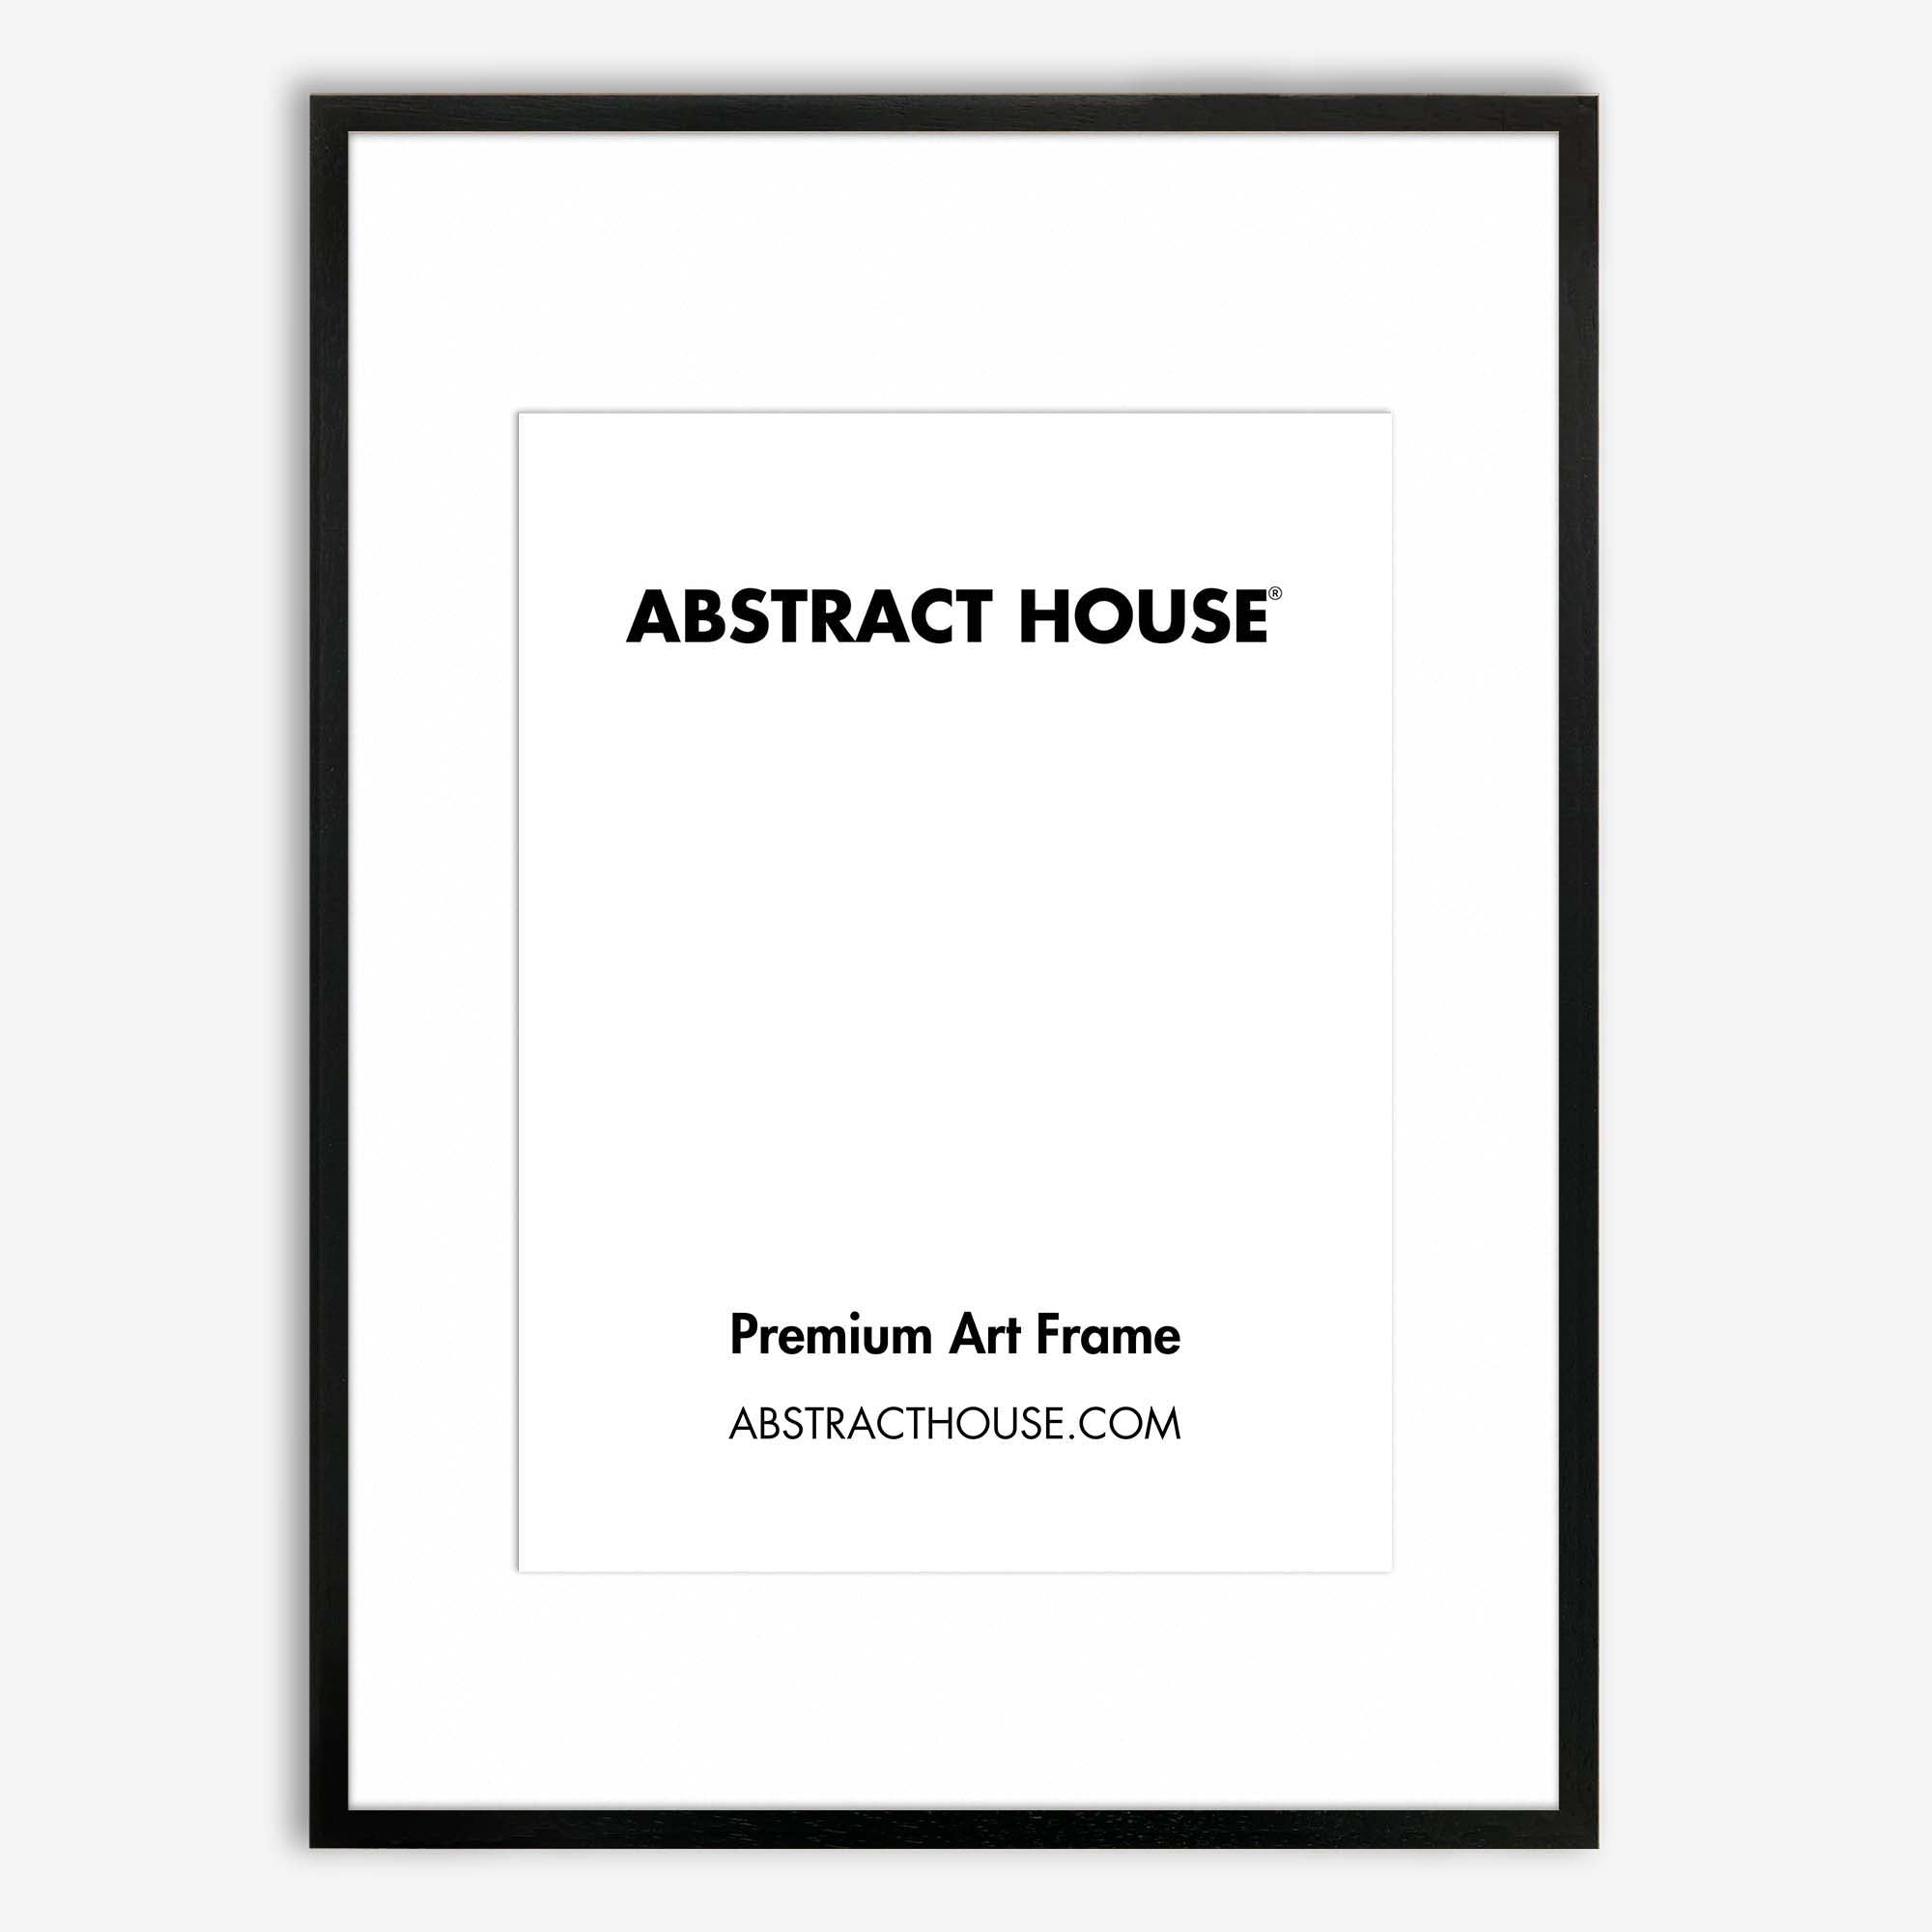 100 x 70 cm Wooden Picture Frame-Black-50 x 70 cm-Abstract House